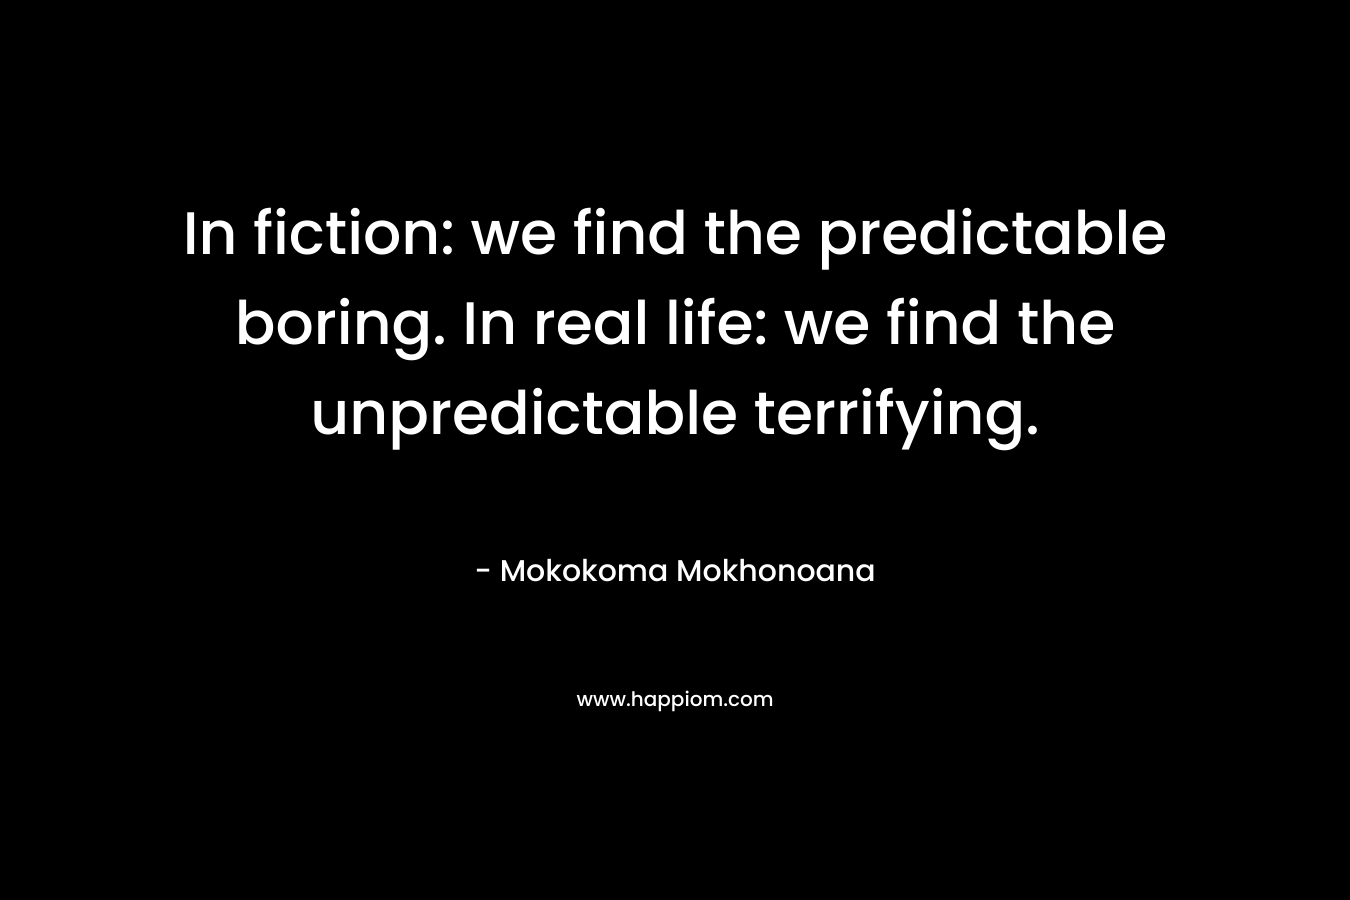 In fiction: we find the predictable boring. In real life: we find the unpredictable terrifying.